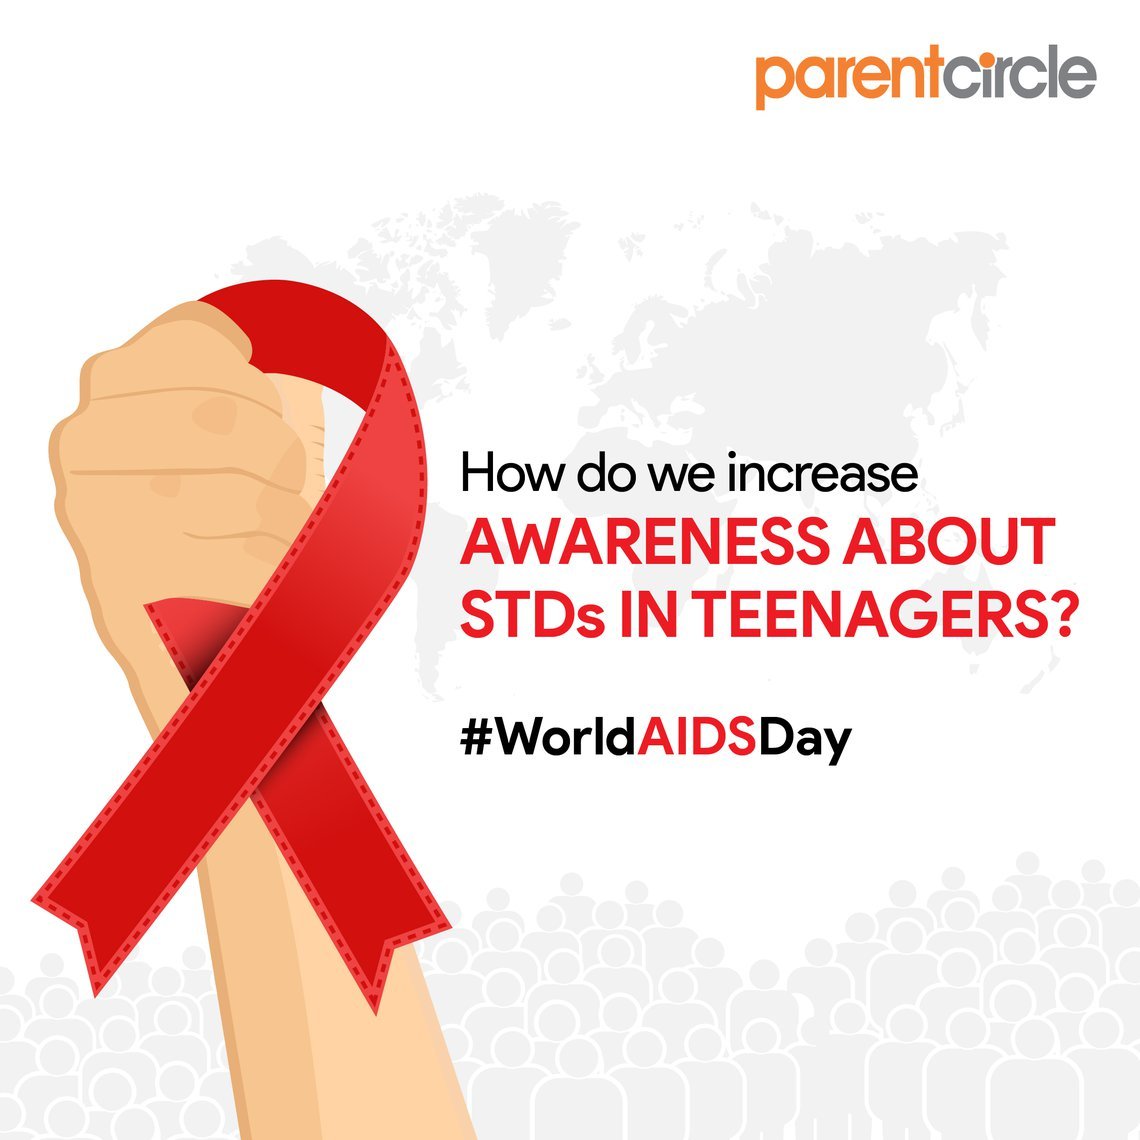 #WorldAIDSDay | How do we increase awareness about STDs in teenagers?